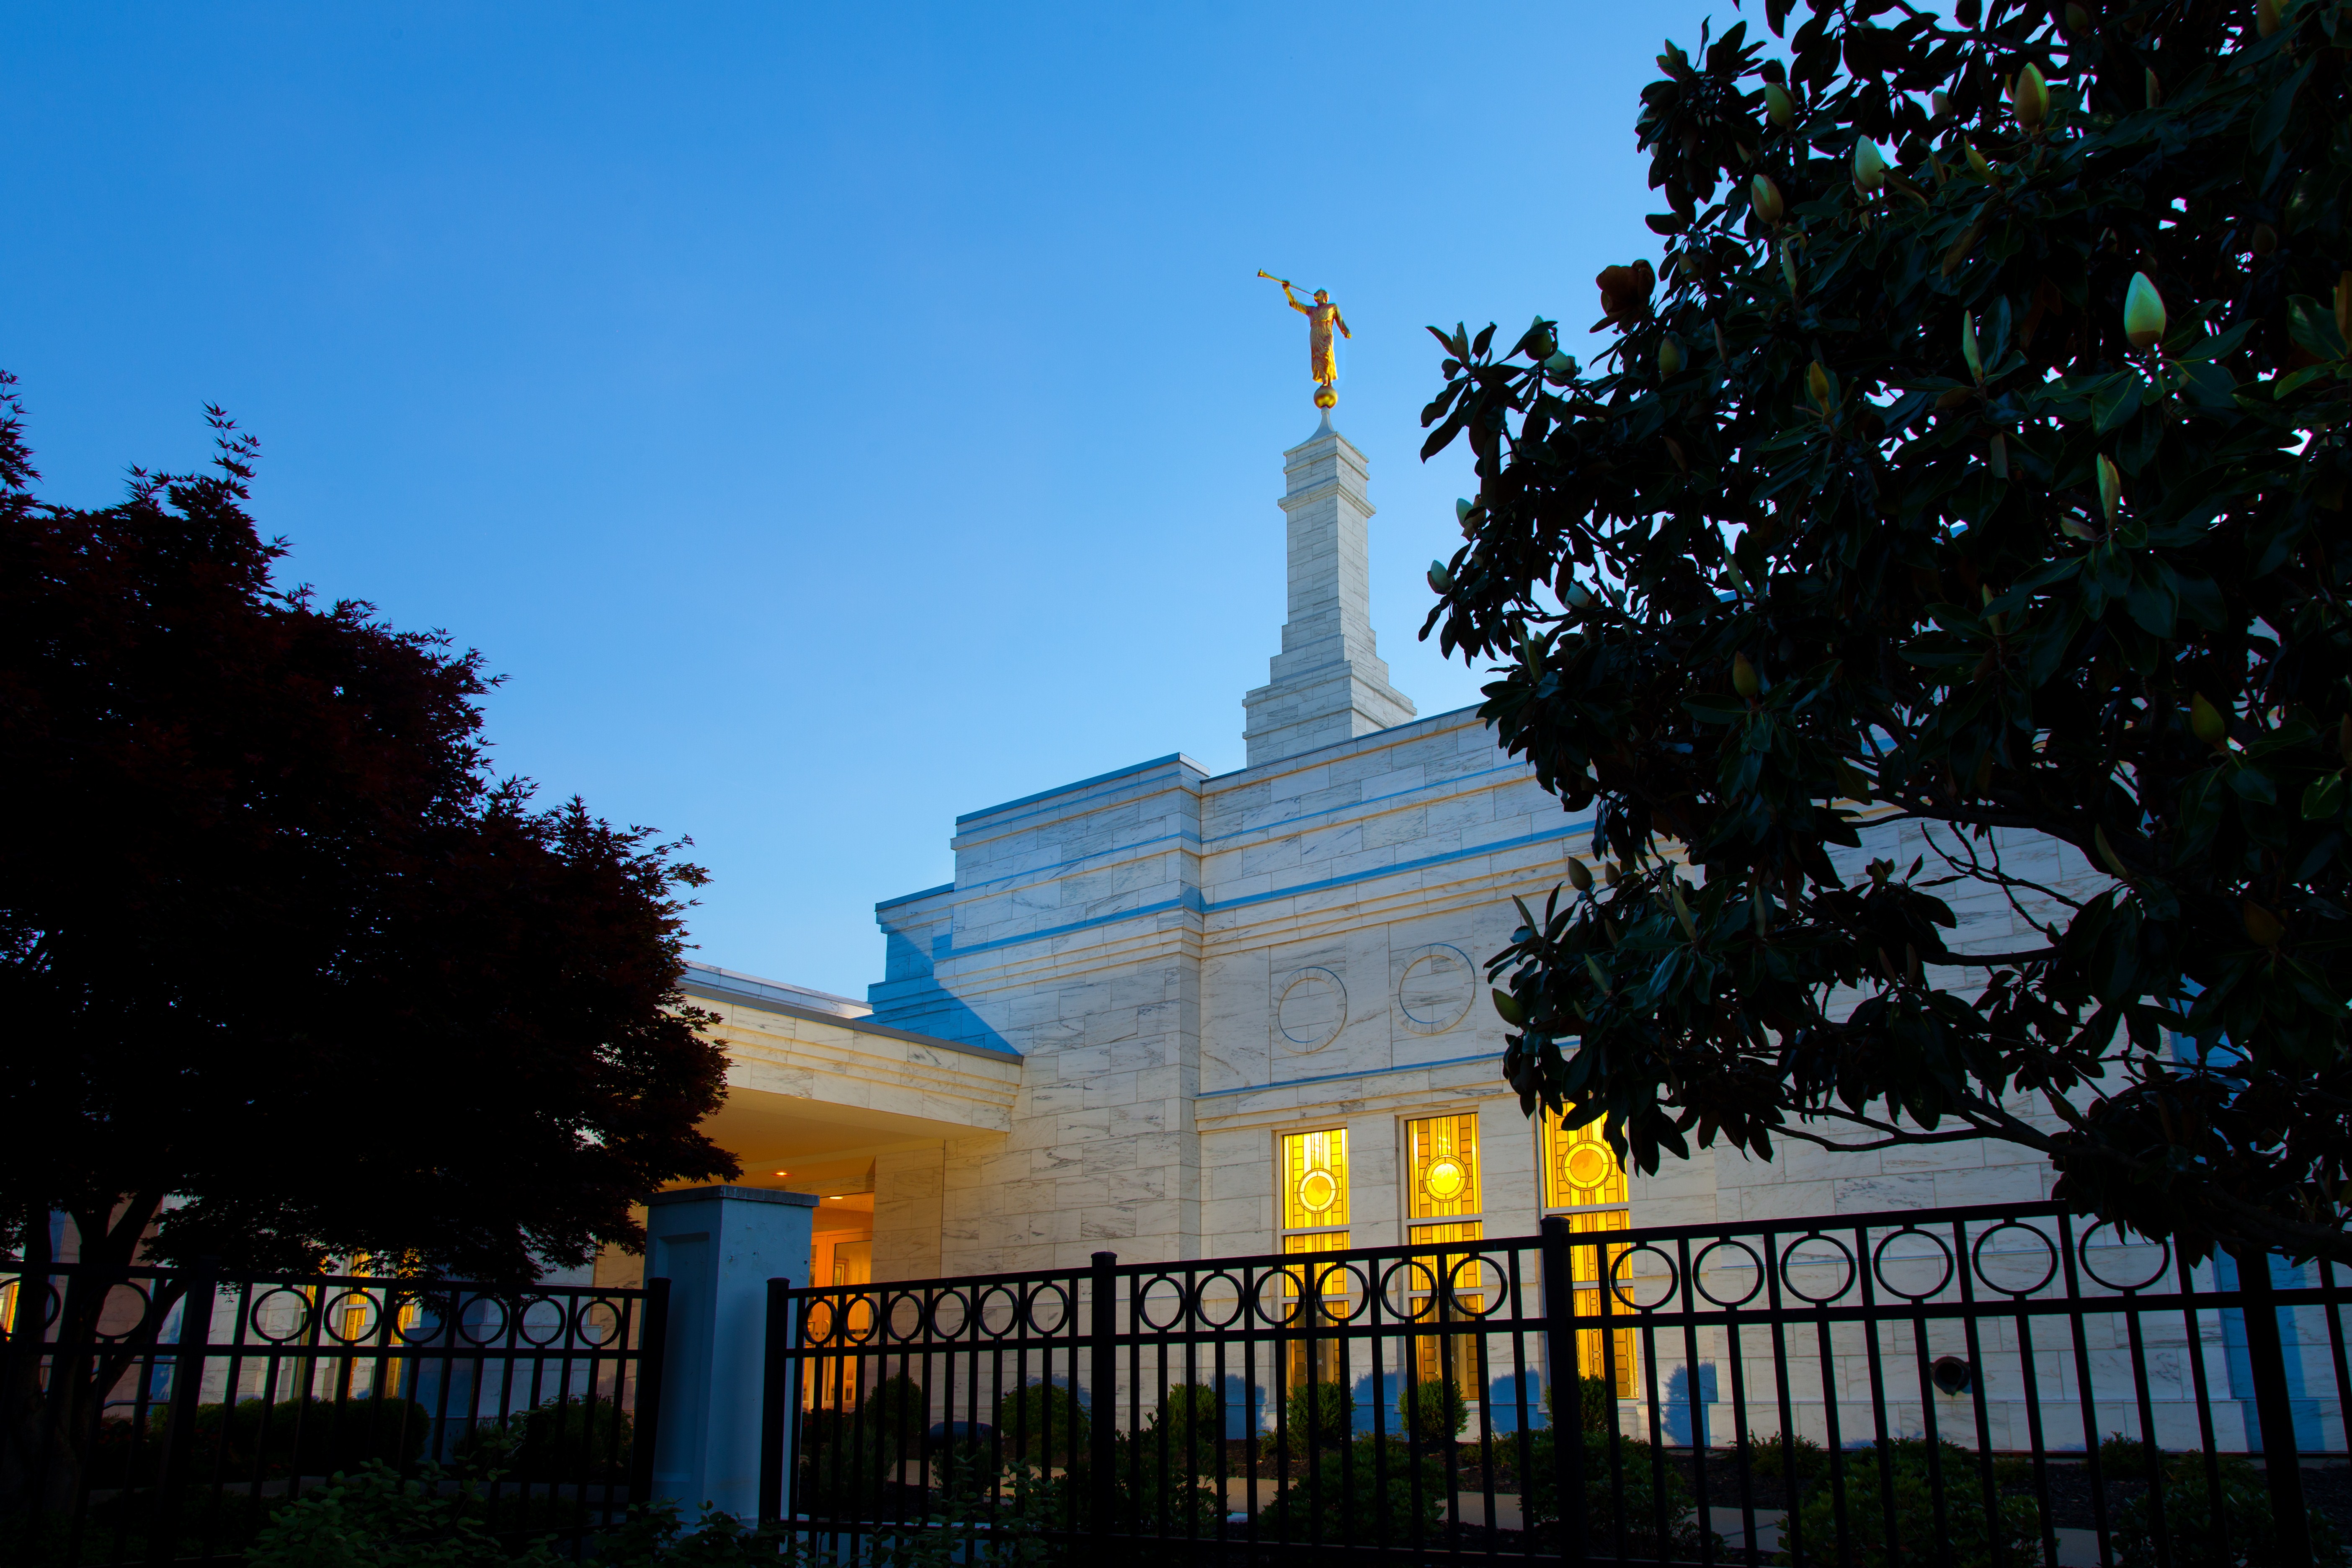 Light shining through the windows of the Memphis Tennessee Temple in the evening.